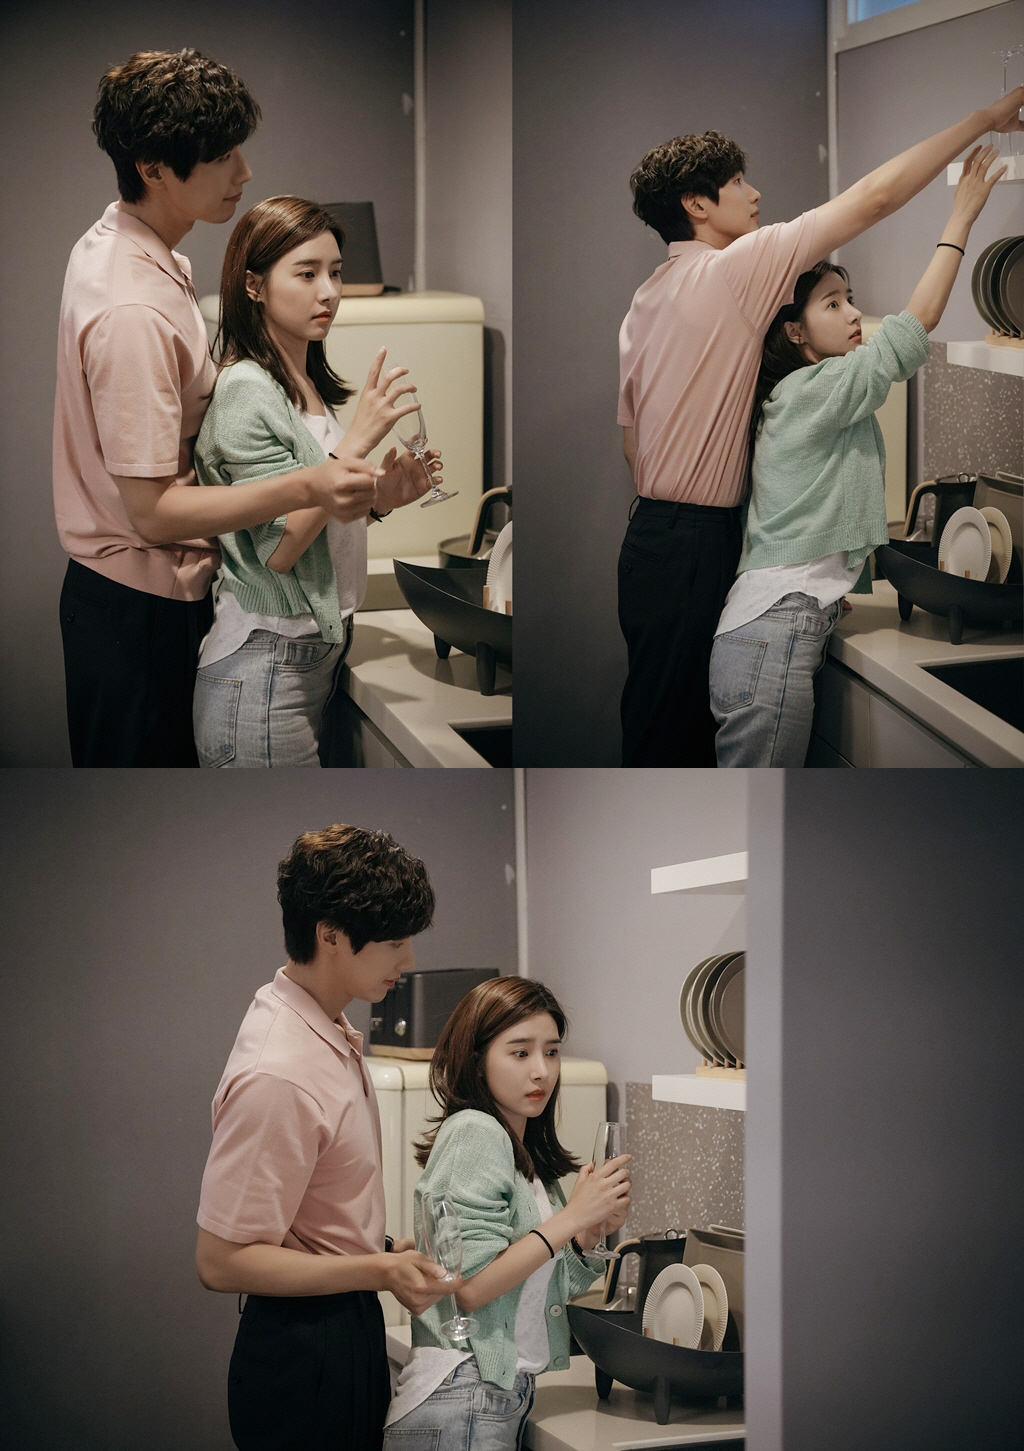 Love is annoying but I hate lonely! the thrilling skinship of Ji Hyun Woo and Kim So-eun was captured.MBC Everlon O Lizzynal drama Love is annoying but I do not want to be lonely!(Love is annoying...) is a romance of living together in a roof of 2030s who want to do Love but serious things are burdensome and enjoy freedom but do not like loneliness.It is captivating the enthusiastic viewers by giving the sympathy of romance and the reality youth.Especially notable in Love is annoying... is the fresh and warm romance aura of steamy charmed Cha Gang-woo and real-life youth Lee Na-eun (Kim So-eun).A word of words thrown by Cha Kang-woo, a psychiatrist, comforts Lee Na-euns heart, which still pursues dreams in a tight reality.Especially, the reaction of viewers became even hotter as the two people cared about each other little by little and felt nervous about each other.On September 1, Love is annoying .. The production team is concentrating attention on the appearance of Cha Kang-woo and Lee Na-eun, who once again announced the Shim Kung, ahead of the 4th broadcast.In the photo, Cha Gang-u and Lee Na-eun stand side by side in what appears to be a kitchen; Lee Na-eun appears to be trying to take out a cup from the cabinet.But the cup seems to be at a high point beyond Lee Na-euns reach, so a taller cha-gang-woo than Lee Na-eun is taking out the cup instead from behind.The sudden rush of rain makes Lee Na-eun look a little surprised. The surprise of the two people makes the viewer excited.The most striking here is the romance chemistry of Actor Ji Hyun Woo and Kim So-eun, who play Cha Gang-u and Lee Na-eun respectively.The tall Ji Hyun Woo, and the cute and small Kim So-eun. The difference in height between the two acts as a thrilling point.Here, Ji Hyun Woos sweet smile, Kim So-euns lovely expression, combined with a more perfect romance chemistry.This is why many viewers are excited and excited to see the two people.The heart-bombing drama, which is full of heart-bombing scenes. MBC Everlon OLizyal drama Love is annoying but I do not want to be lonely!The fourth episode airs today (1st) Tuesday night at 10:50 p.m.